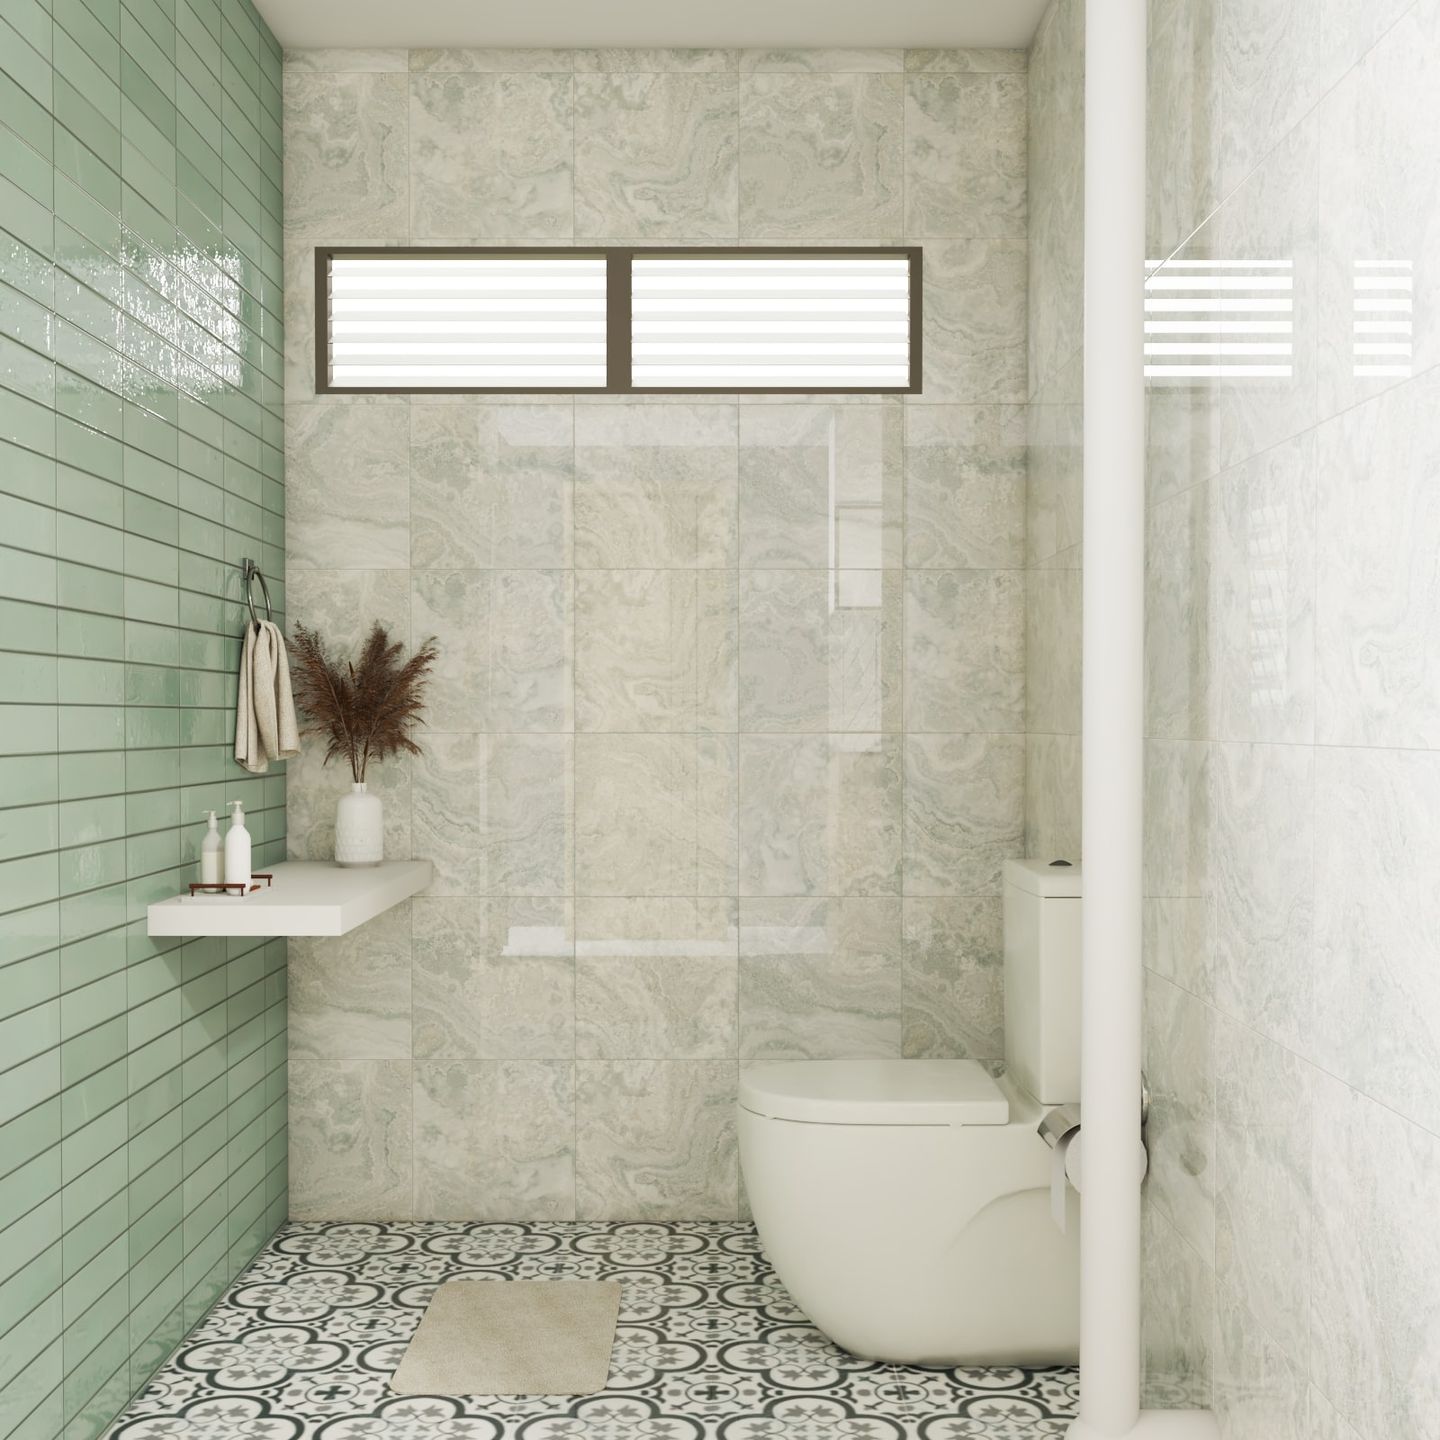 Ceramic Bathroom Wall Tiles With A Glossy Finish - Livspace